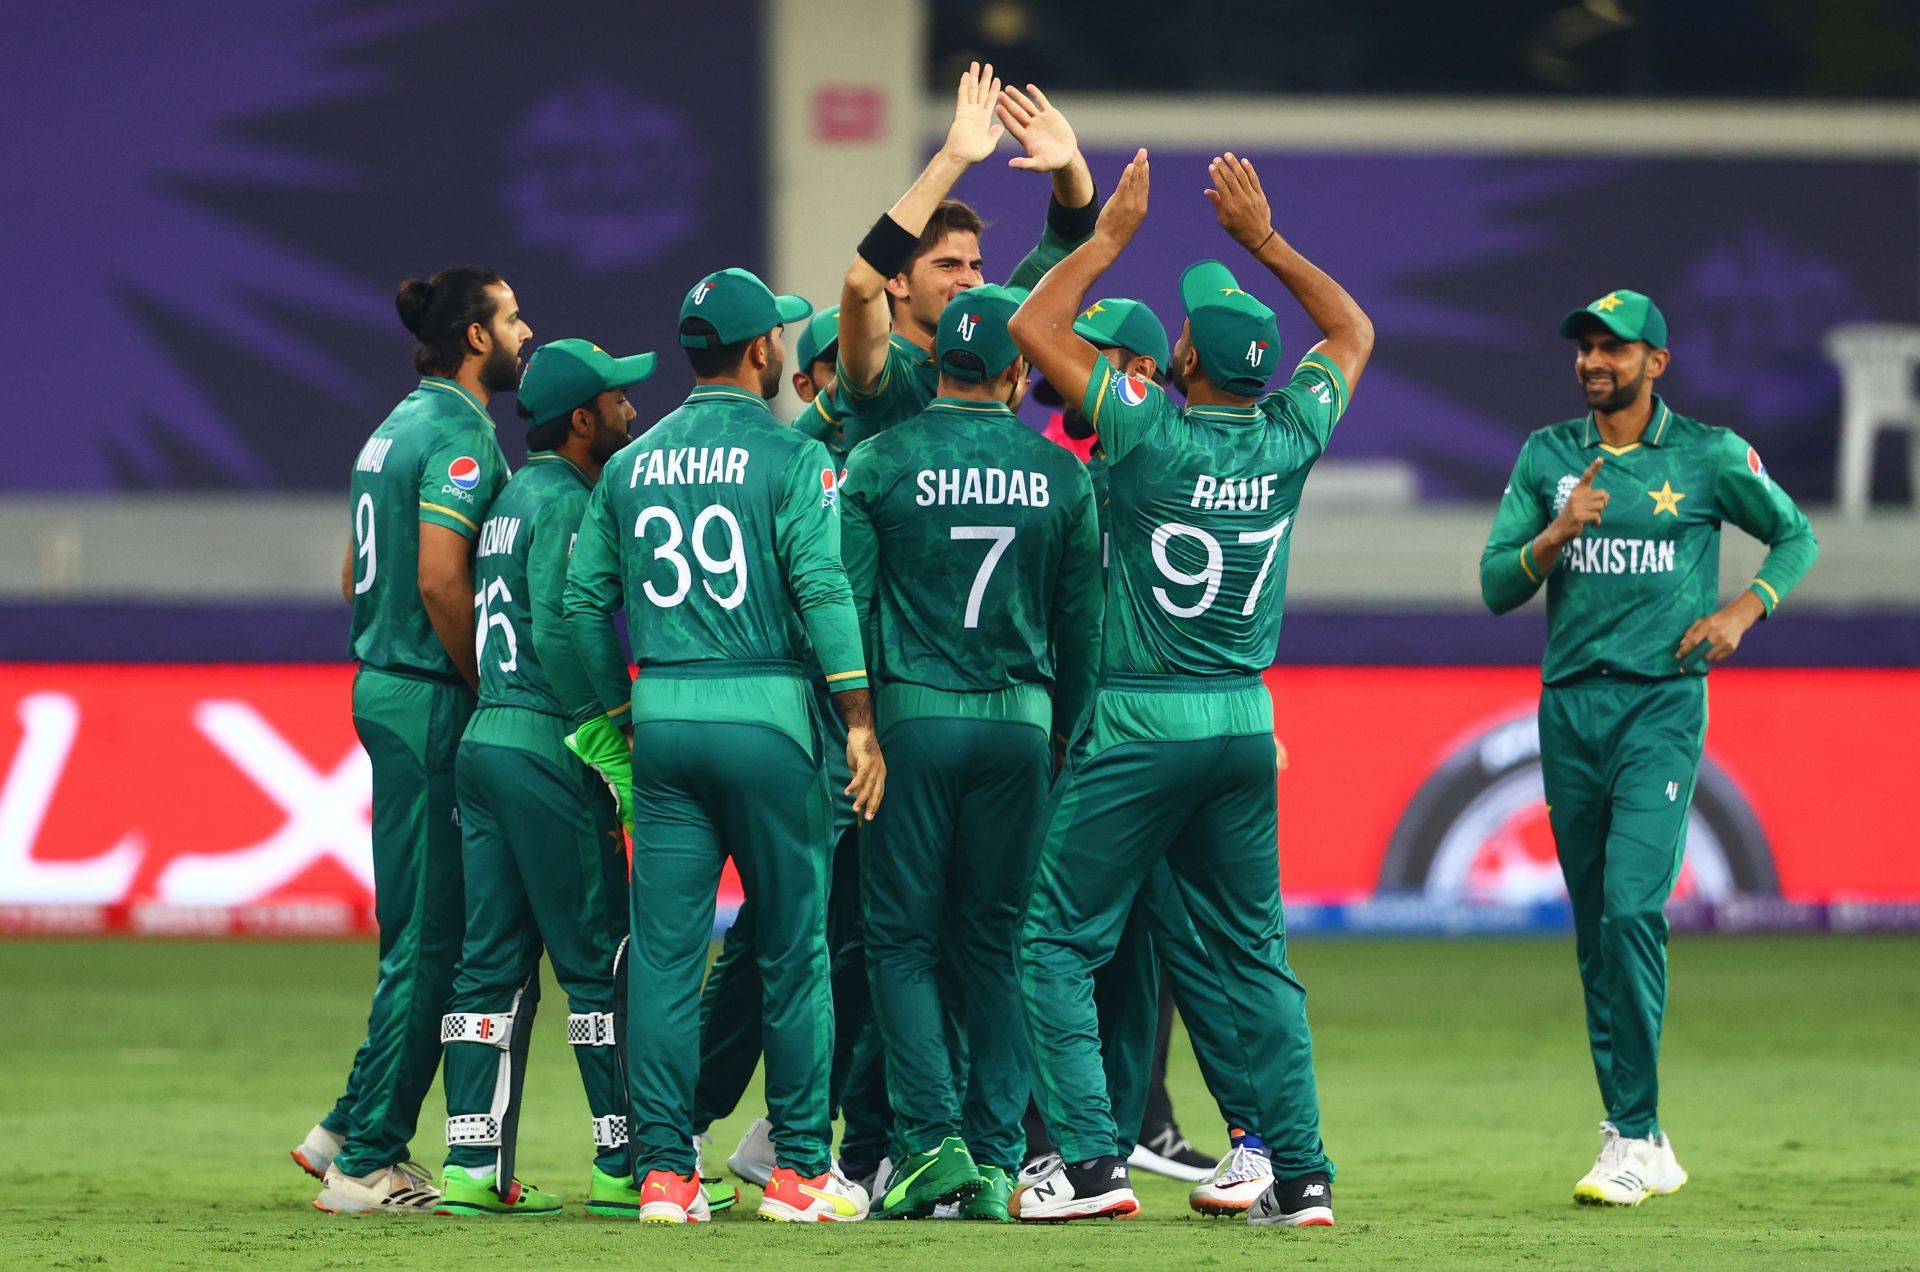 Pakistan finally broke their dreaded streak against India in the World Cup.